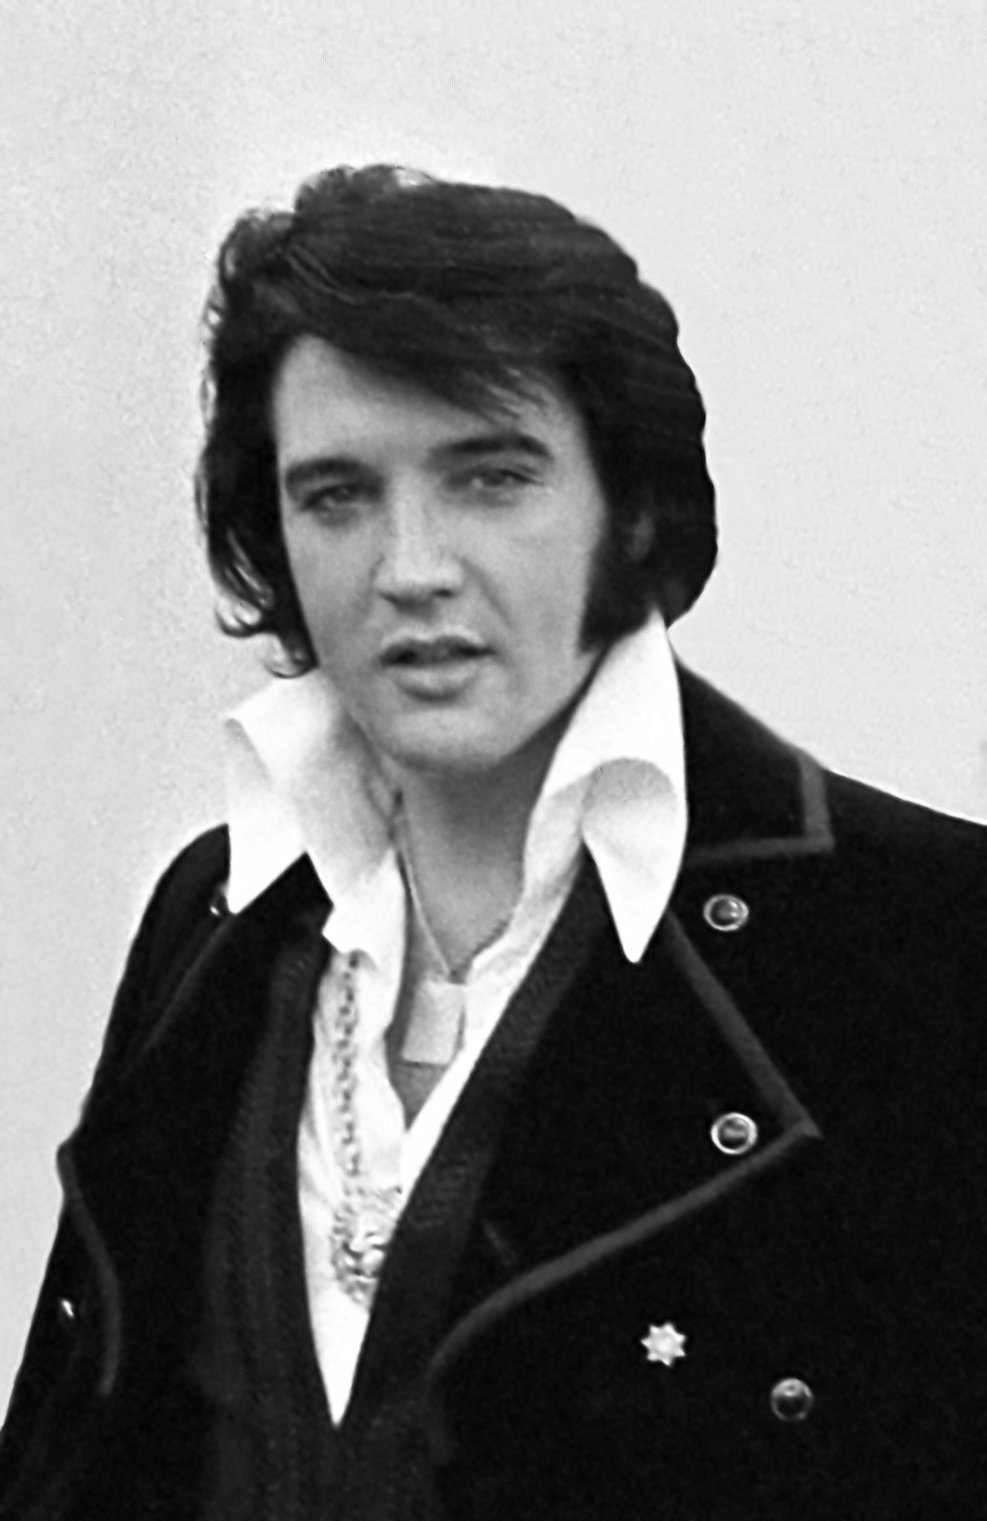 Elvis Presley at the White House, December 21, 1970. | Photo: Wikimedia Commons